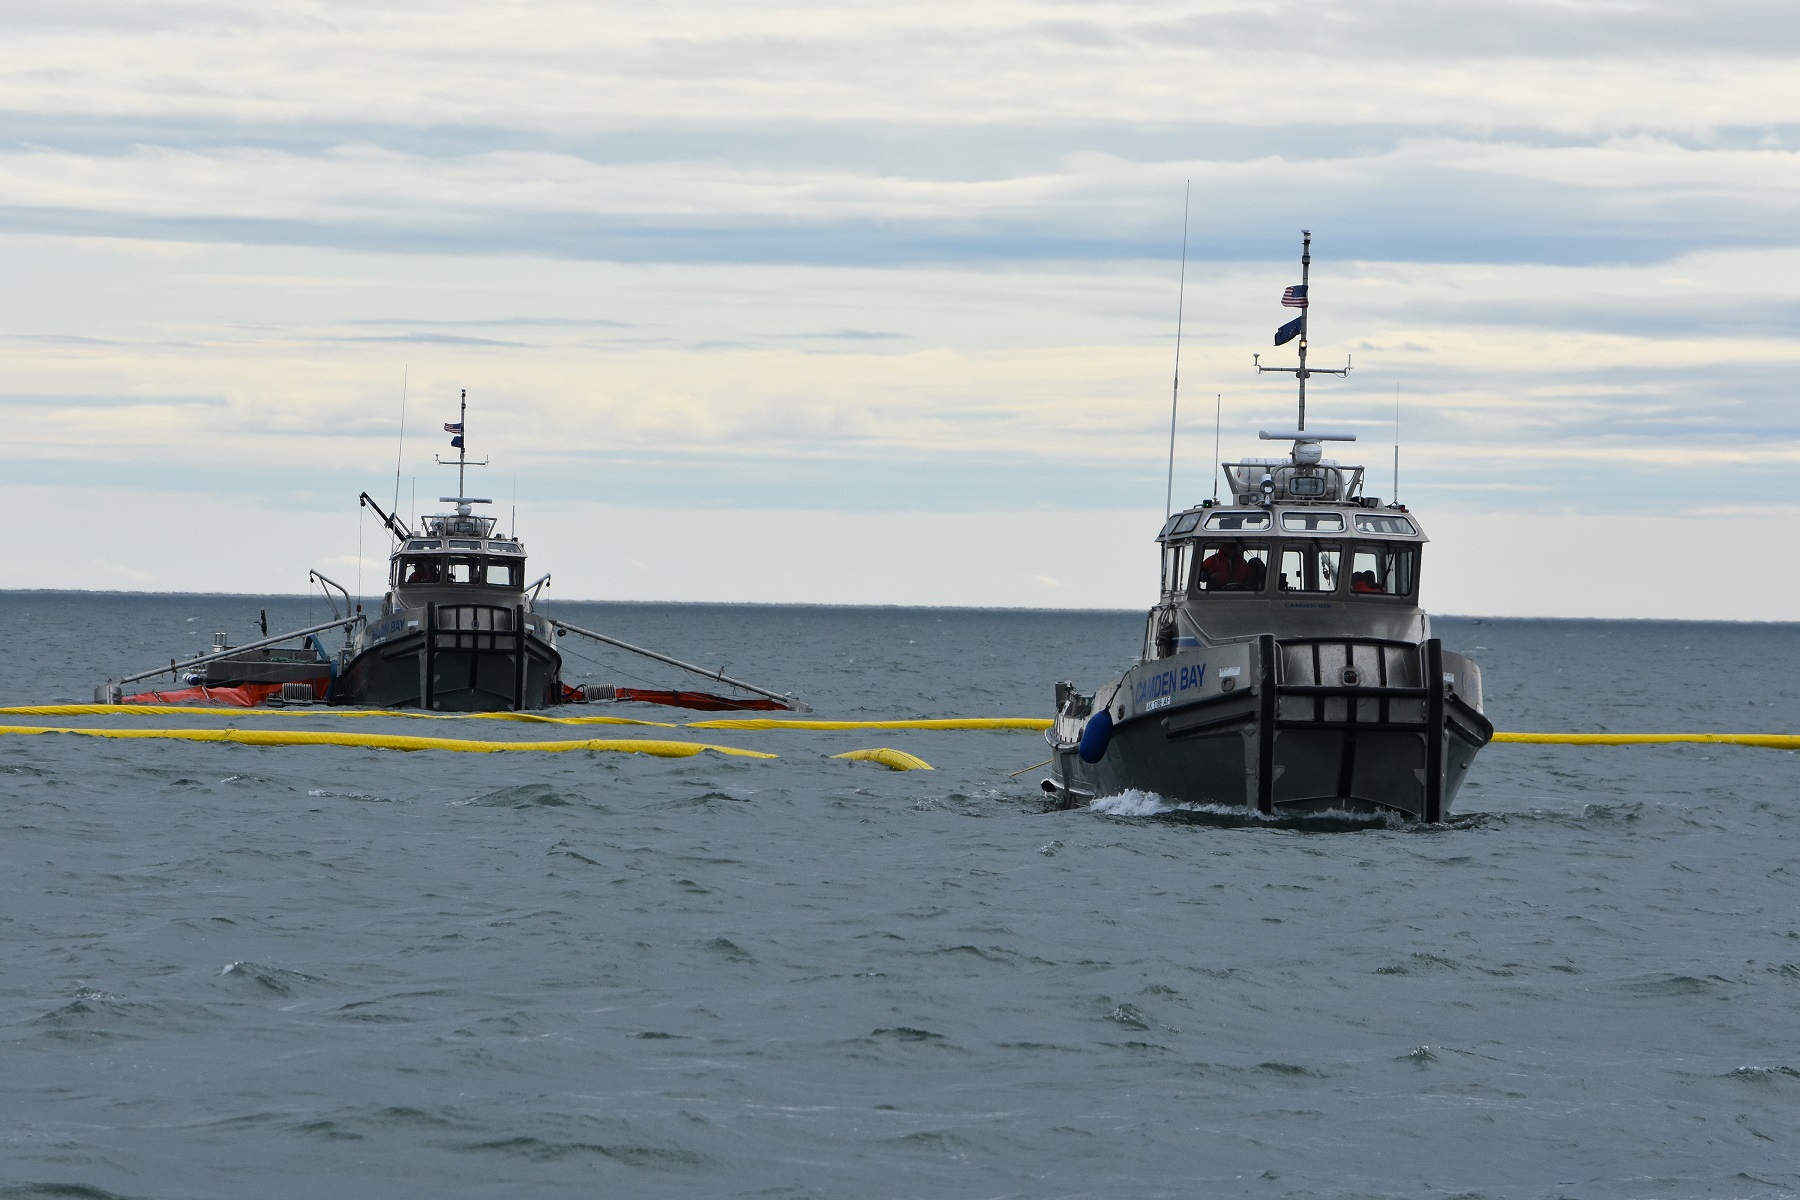 Spill Response Team practicing nearshore recovery Tactic R-20 U-Boom with Open Apex to Skimming System.